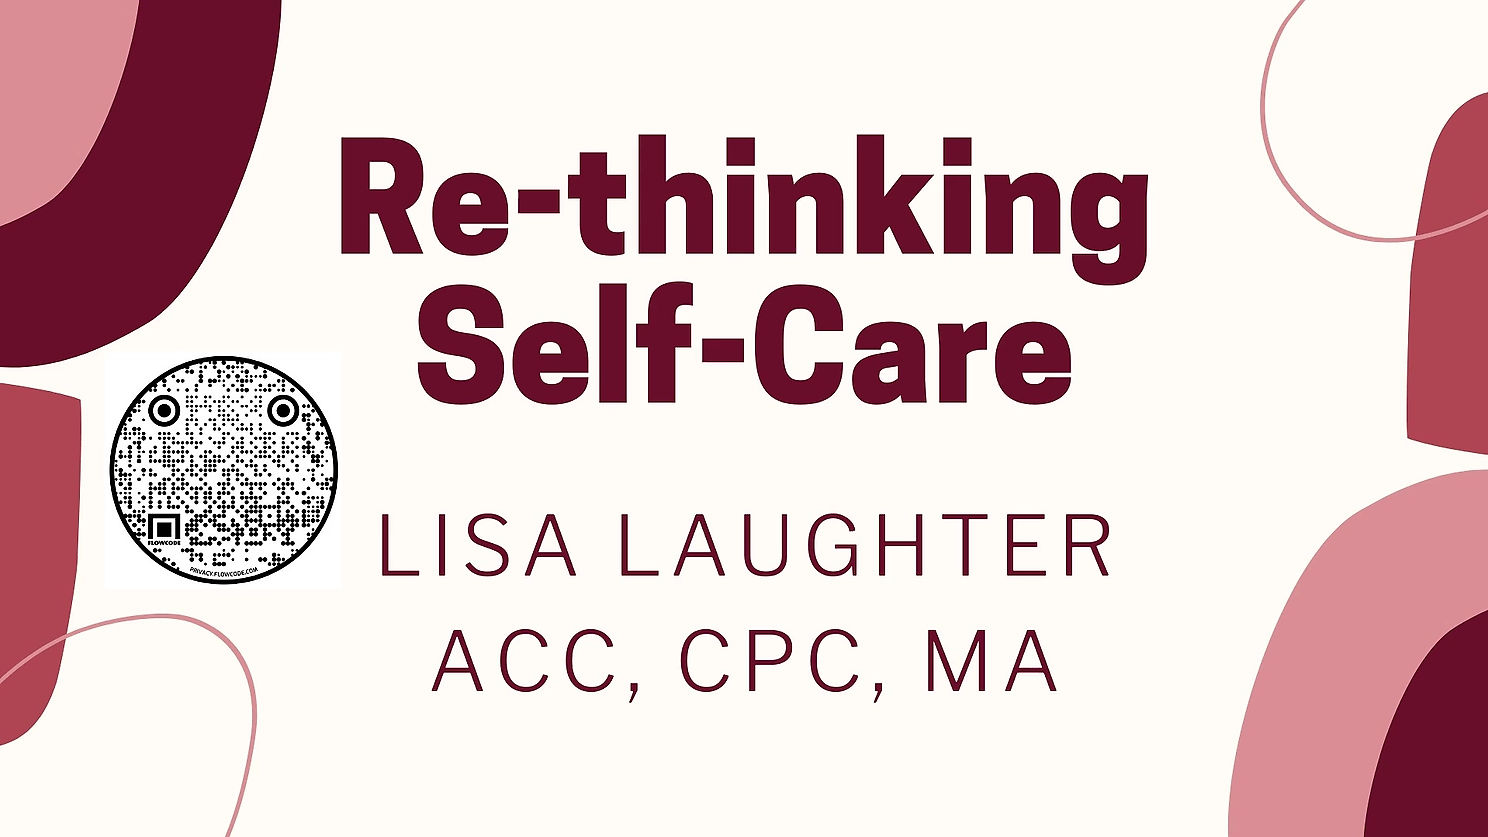 Re-thinking Self-Care